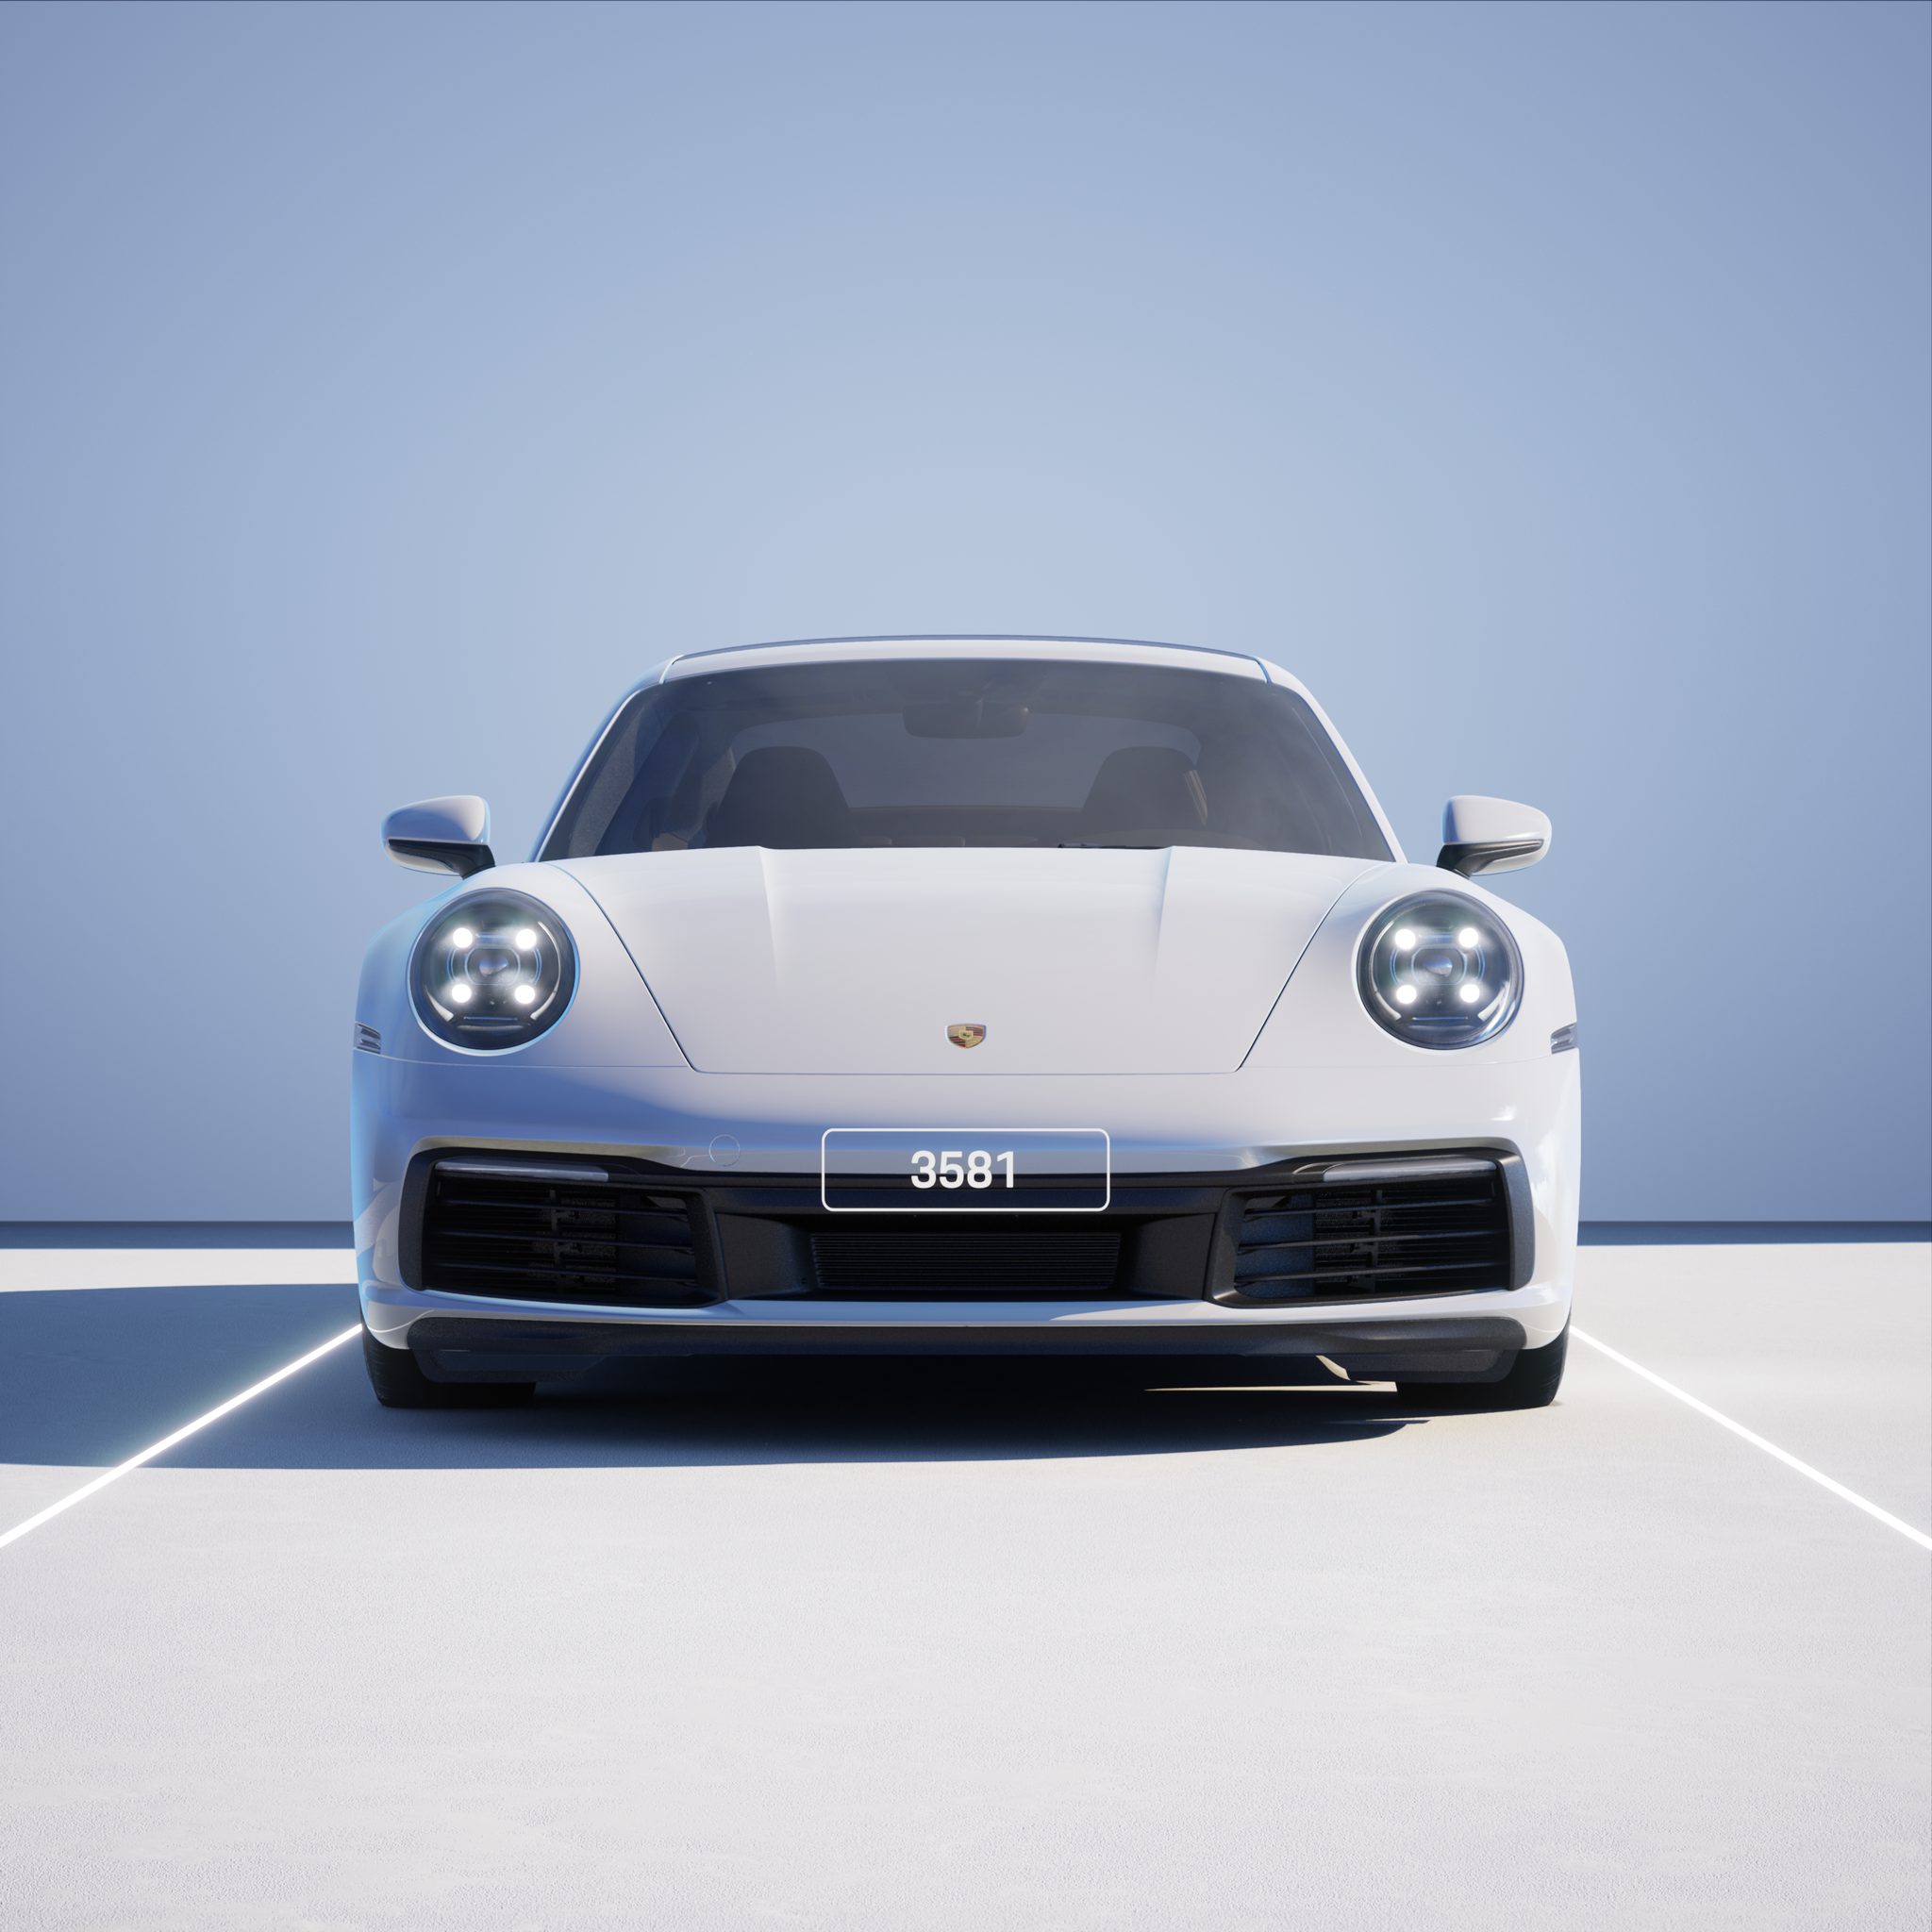 The PORSCHΞ 911 3581 image in phase